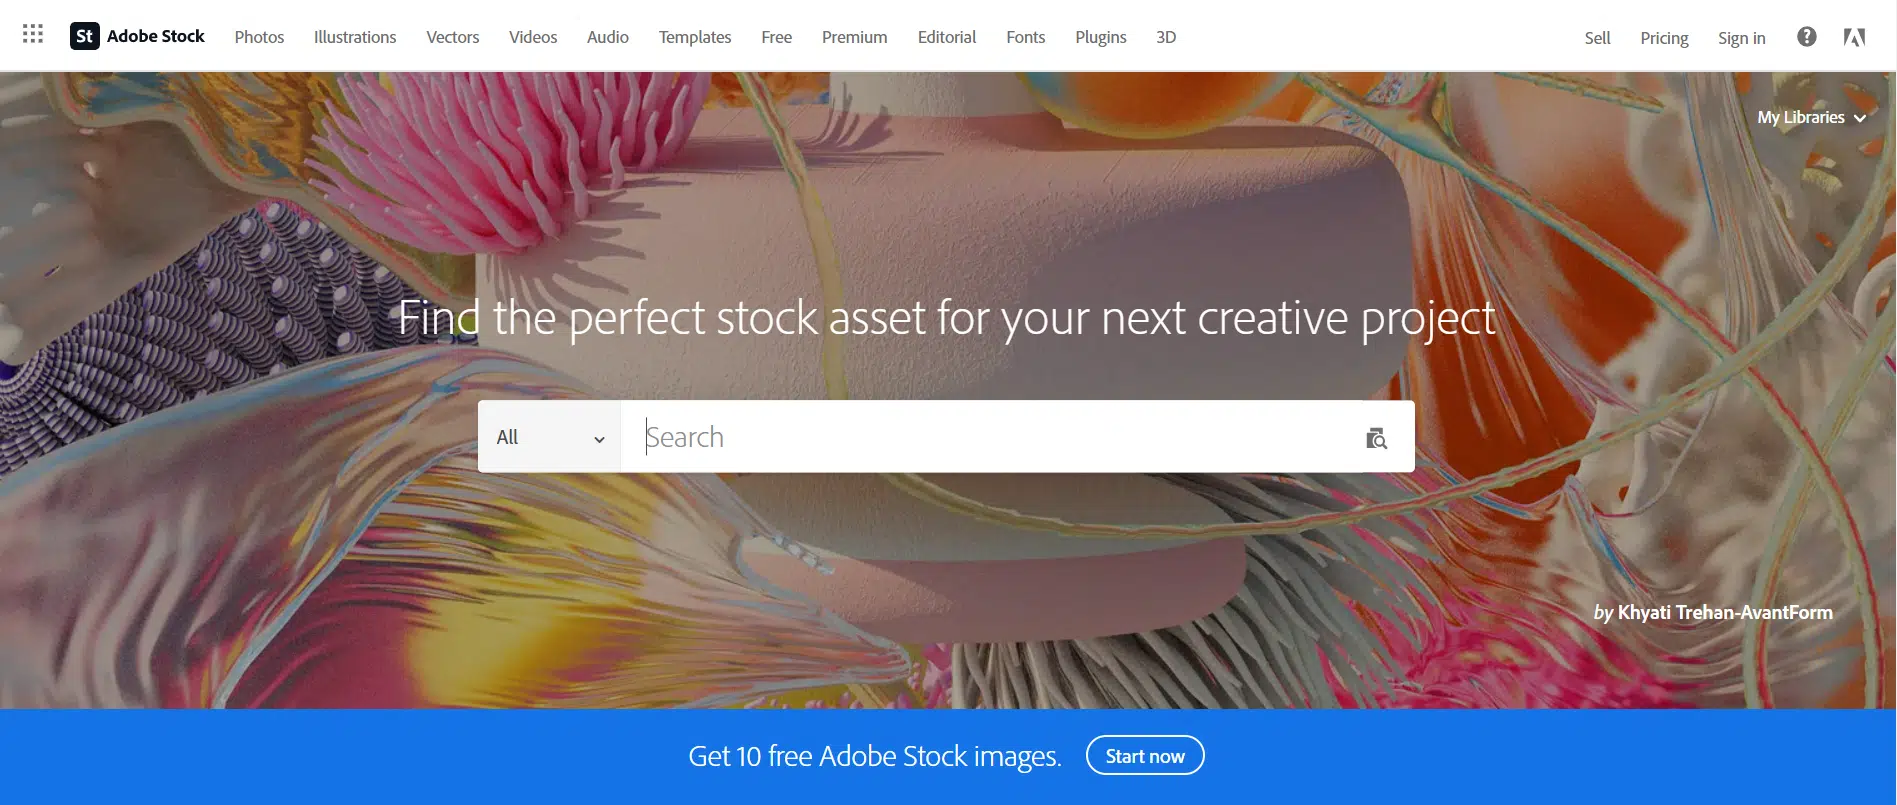 Adobe Stock Review - Features, Pricing, Pros & Cons (2023)